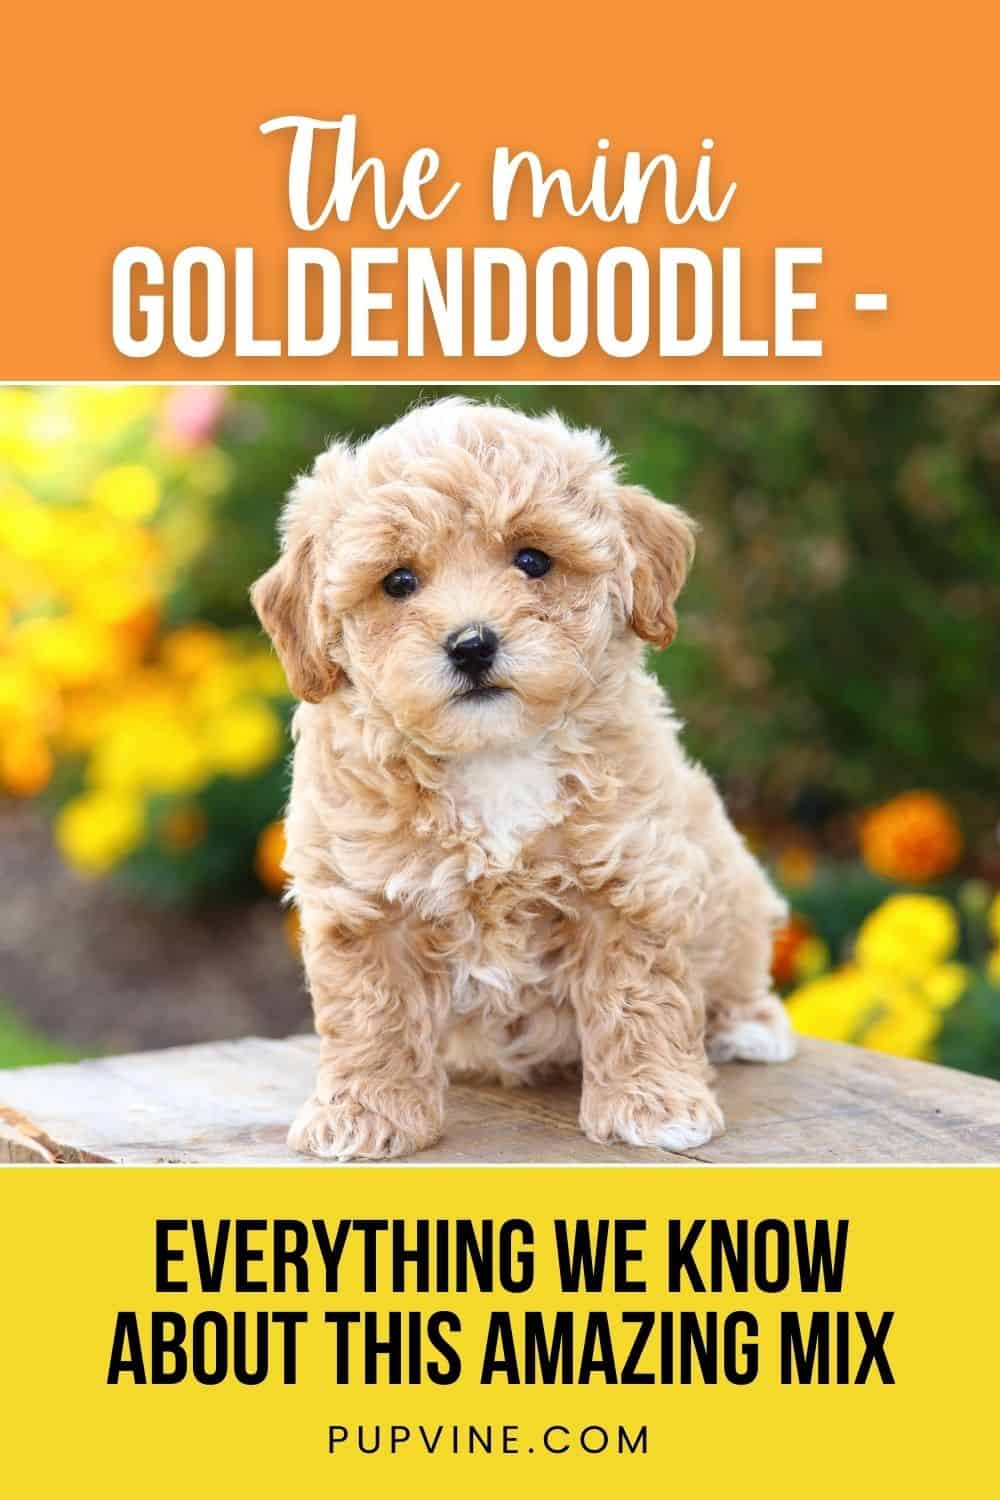 The Mini Goldendoodle - Everything We Know About This Amazing Mix